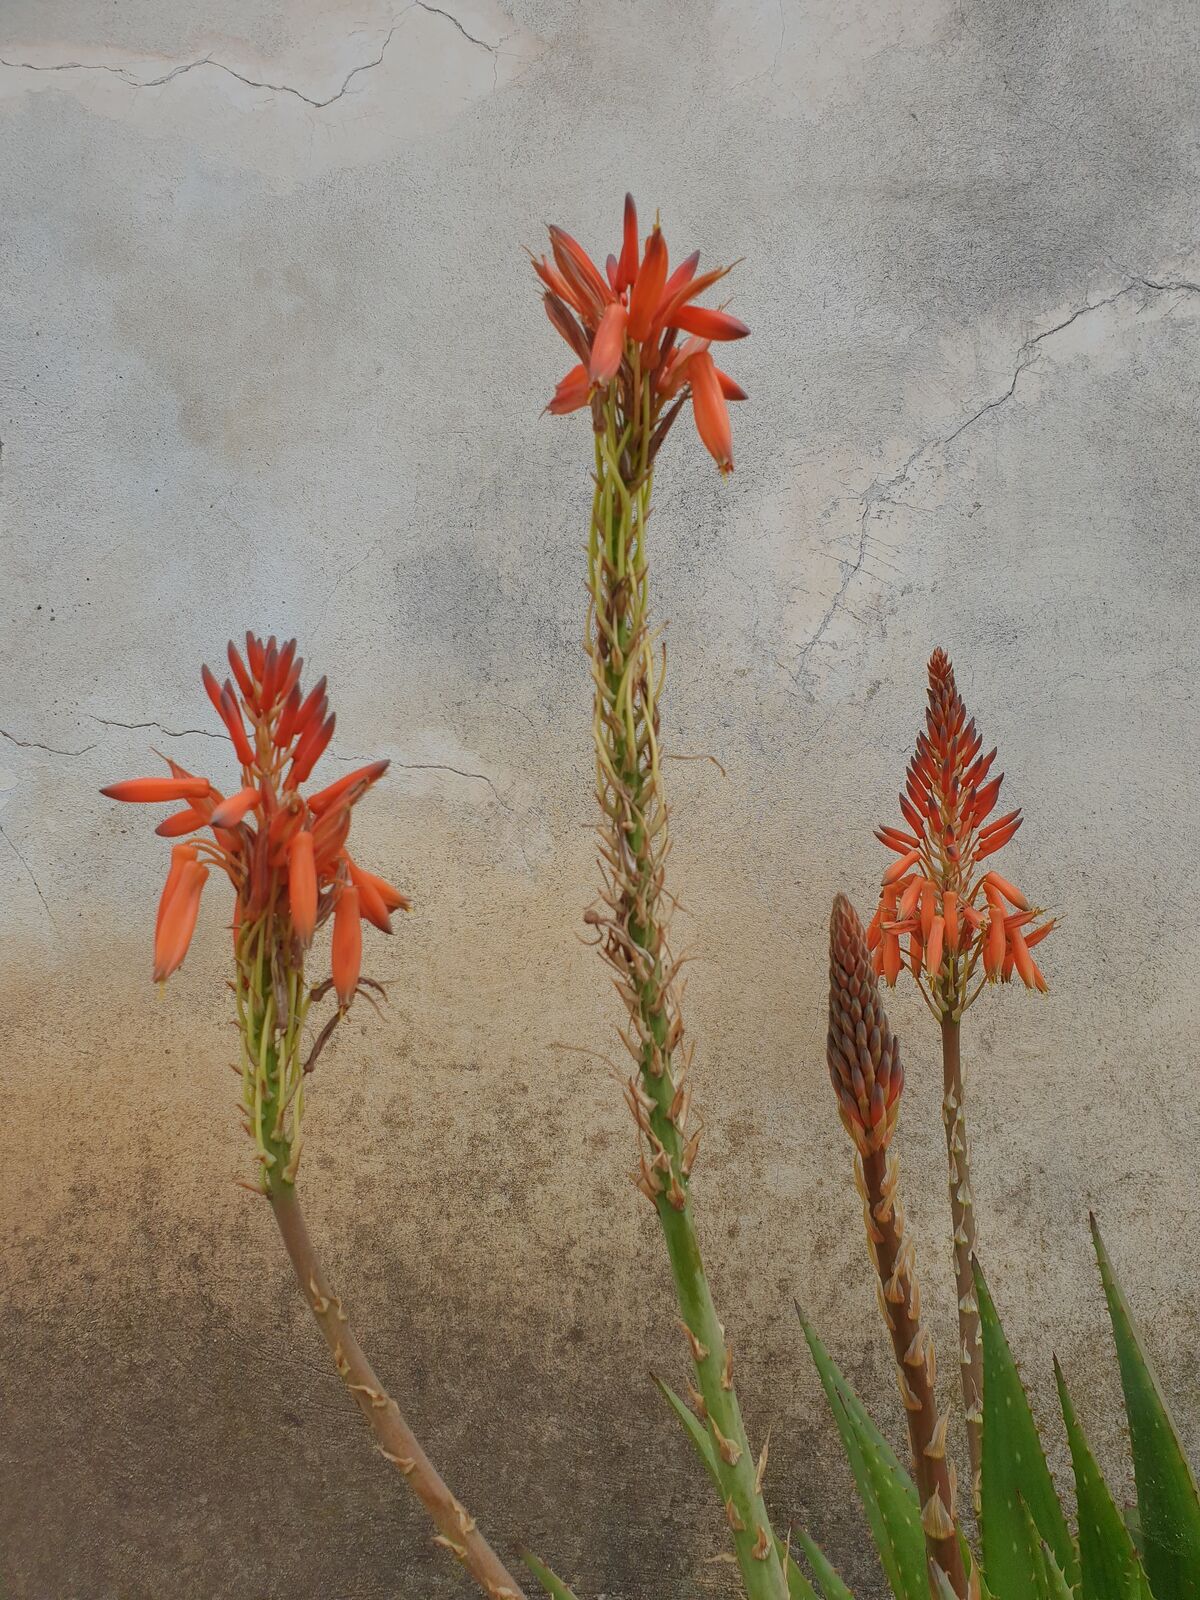 Surprisingly-good snapshot of flowers in front of a crumbling wall